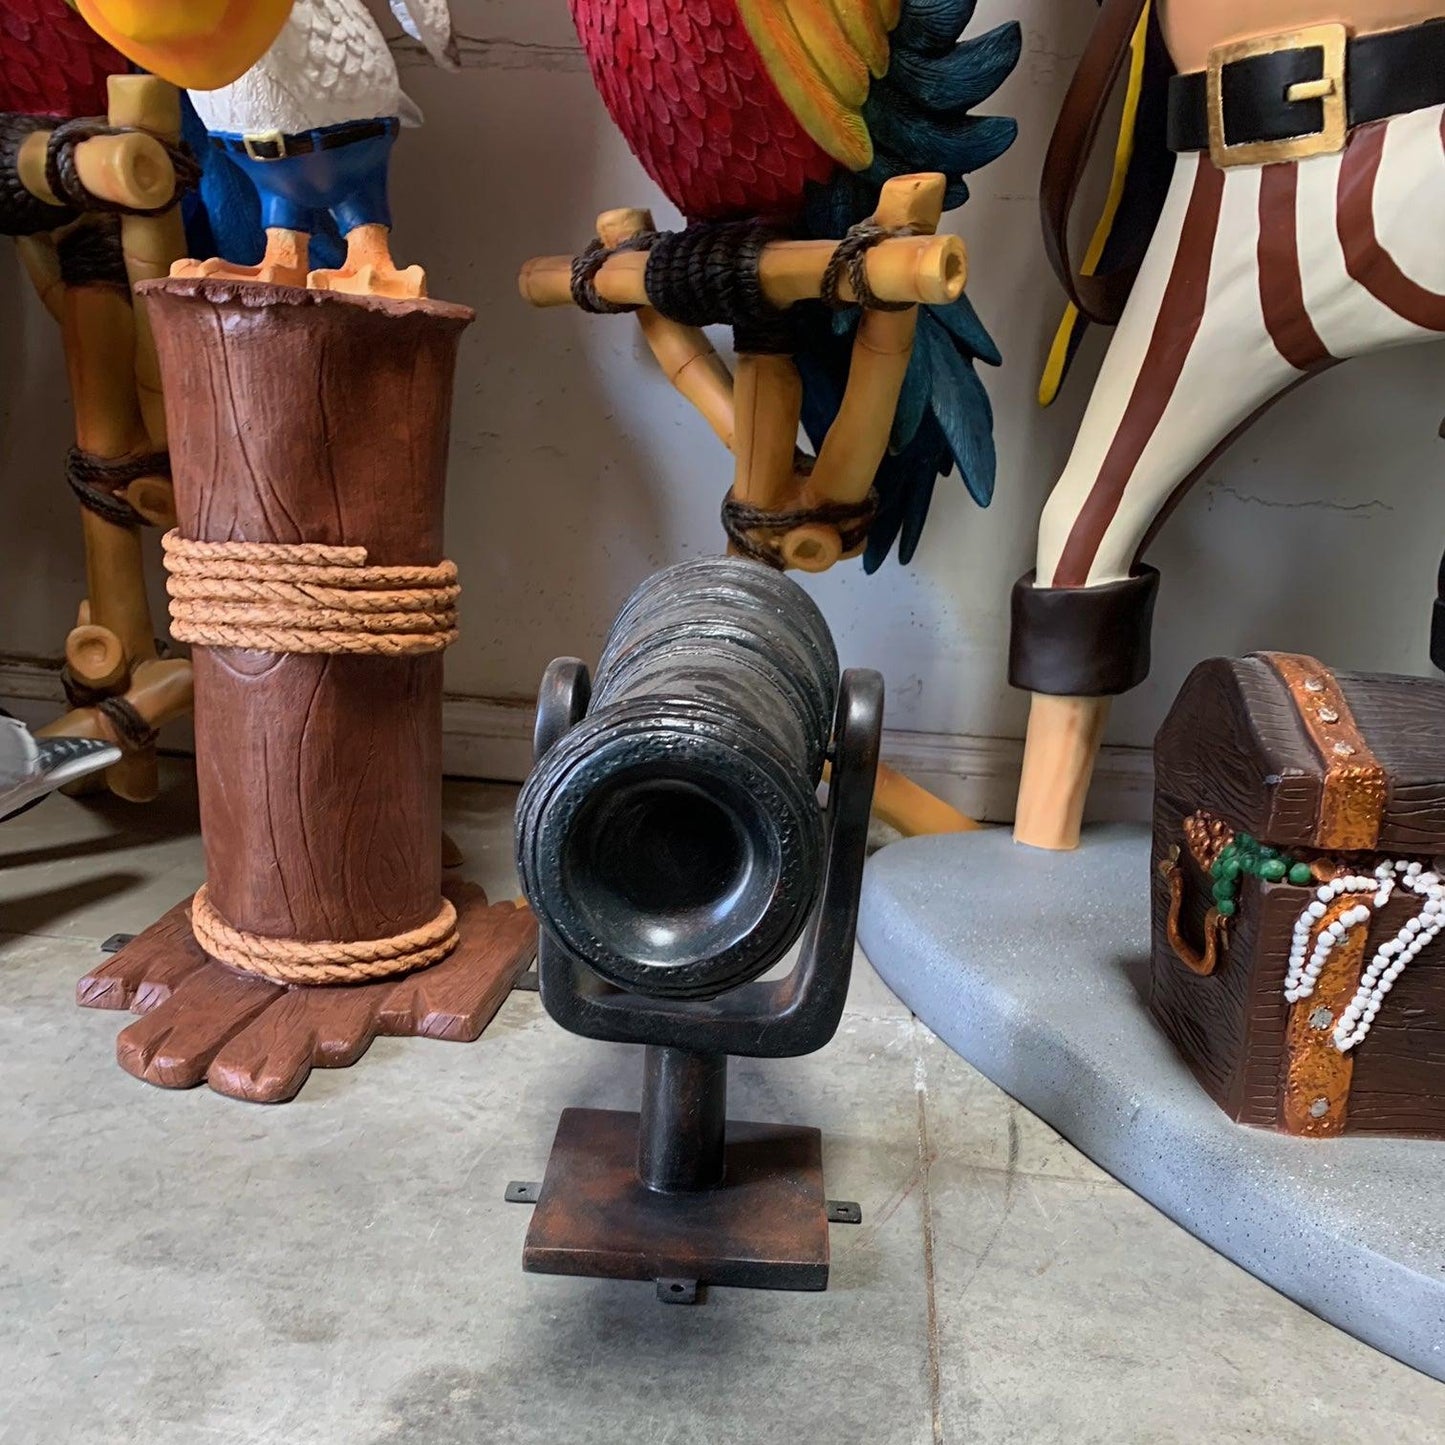 Small Pirate Cannon Life Size Statue - LM Treasures Prop Rentals 